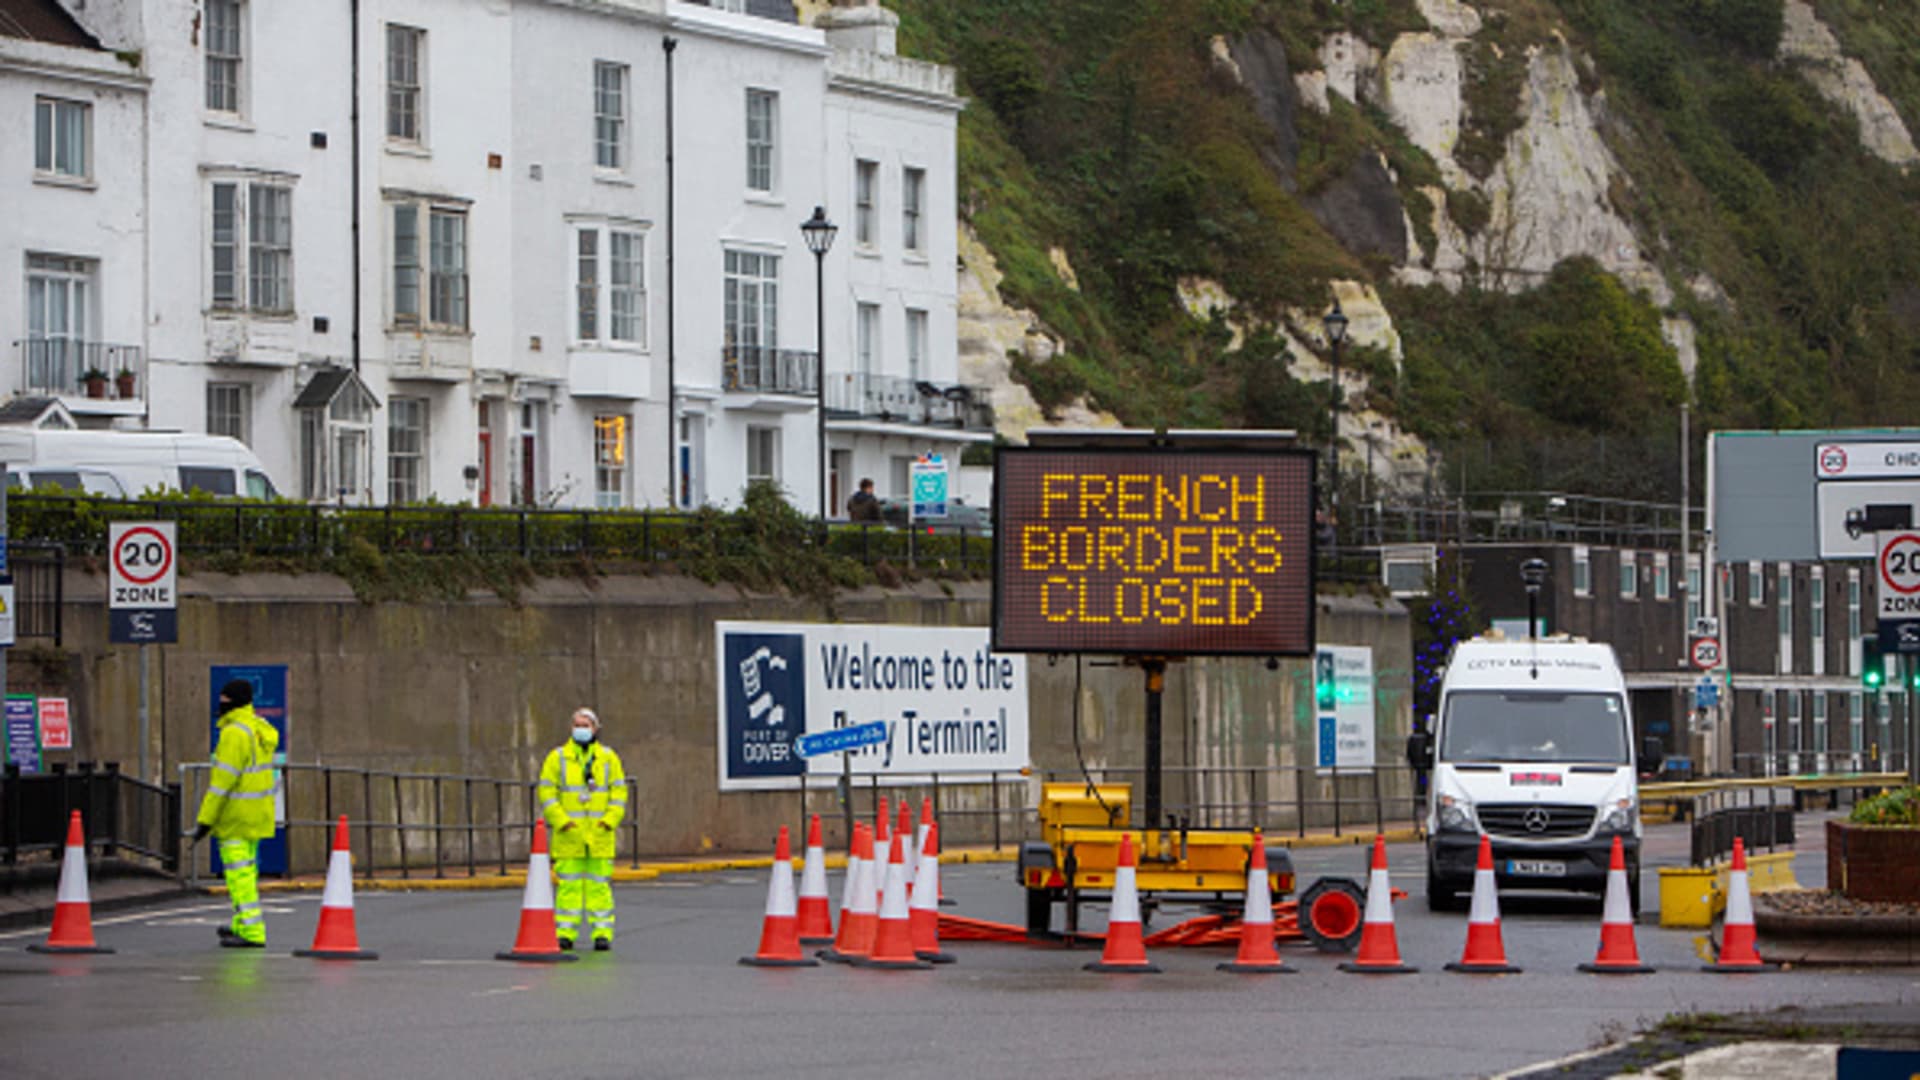 French borders closed sign at the entrance into the port of Dover due to a new strain of COVID-19 in the Eastern Dock where the cross channel port is situated with ferries departing to go to Calais in France on the 21st of December 2020, Dover, Kent, United Kingdom.